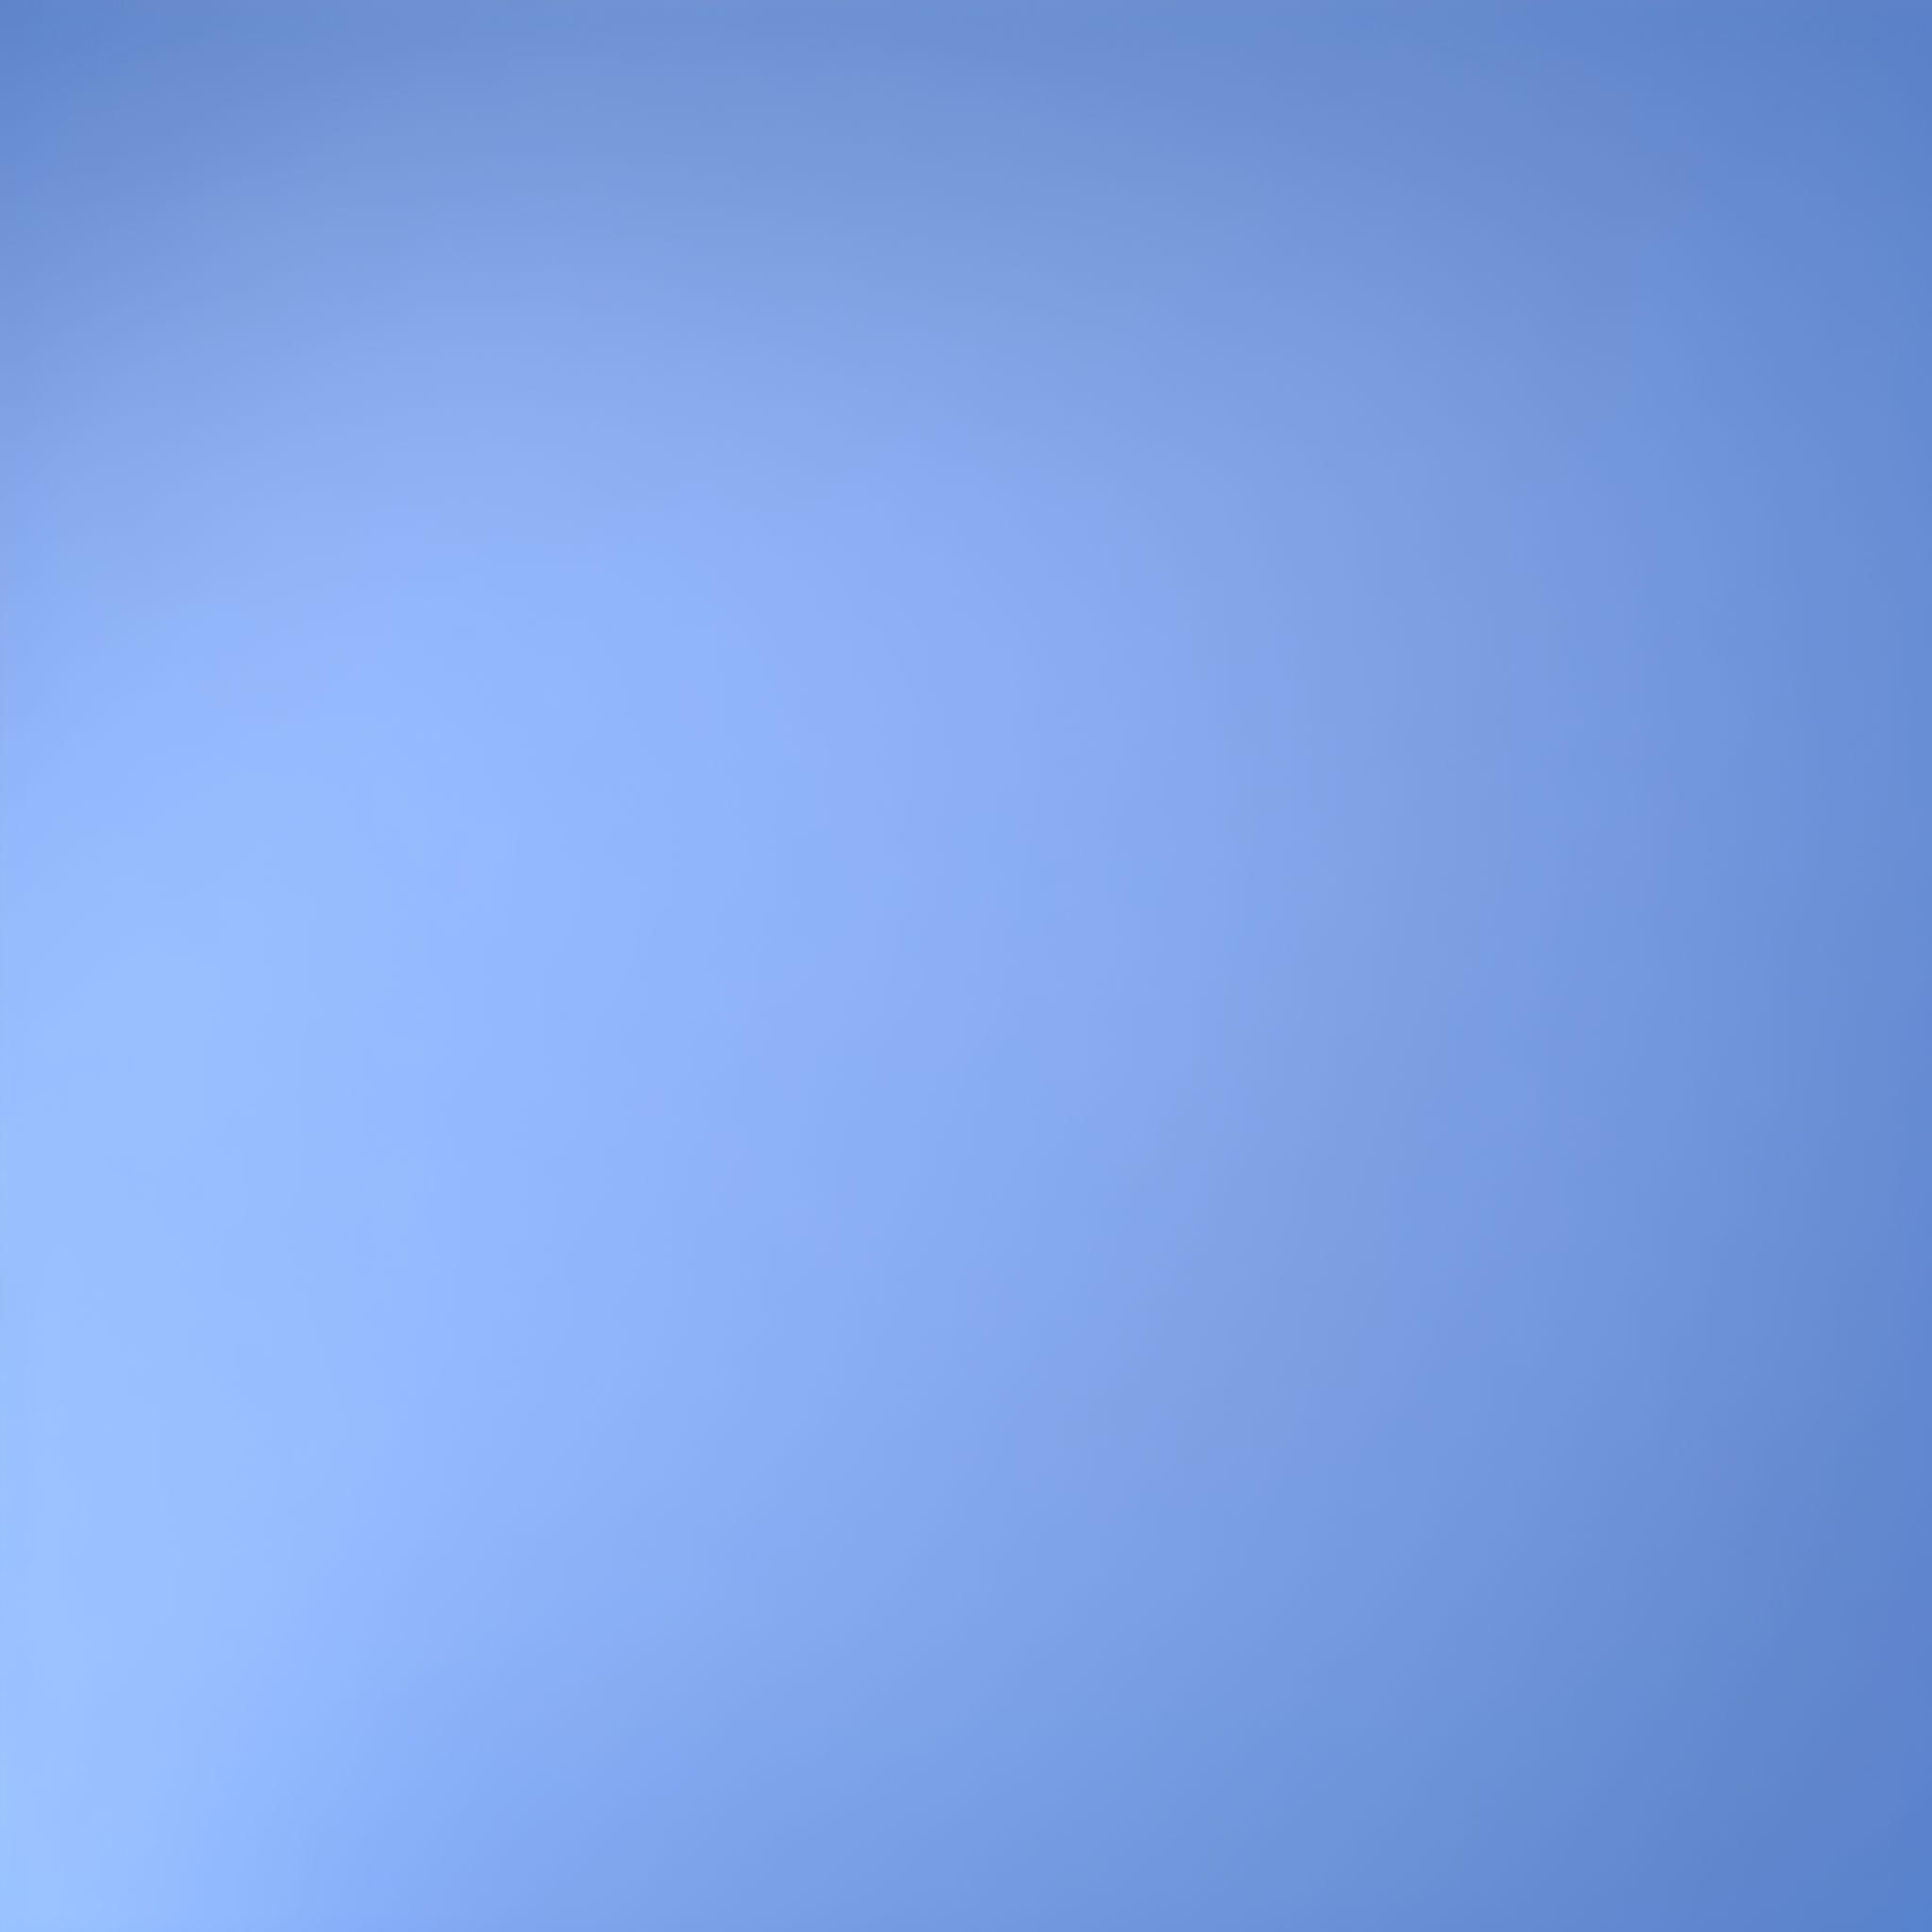 Blue Backgrounds, Images & Wallpapers- Download for Free | Fotor